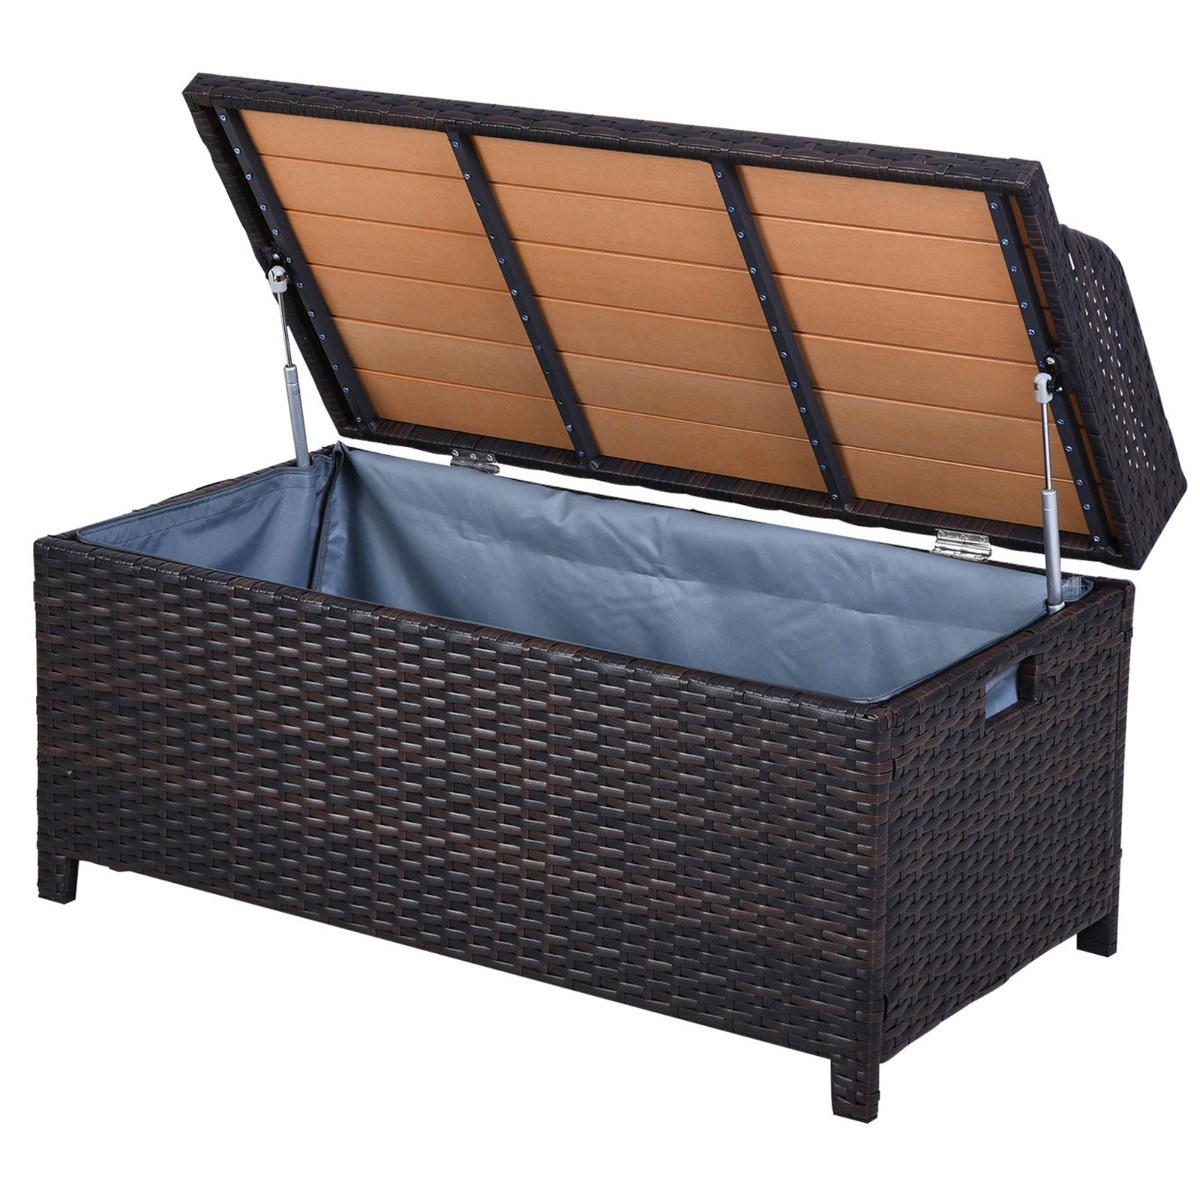 Outsunny  Wicker Rattan Storage Box Seat With Cushion - Brown>